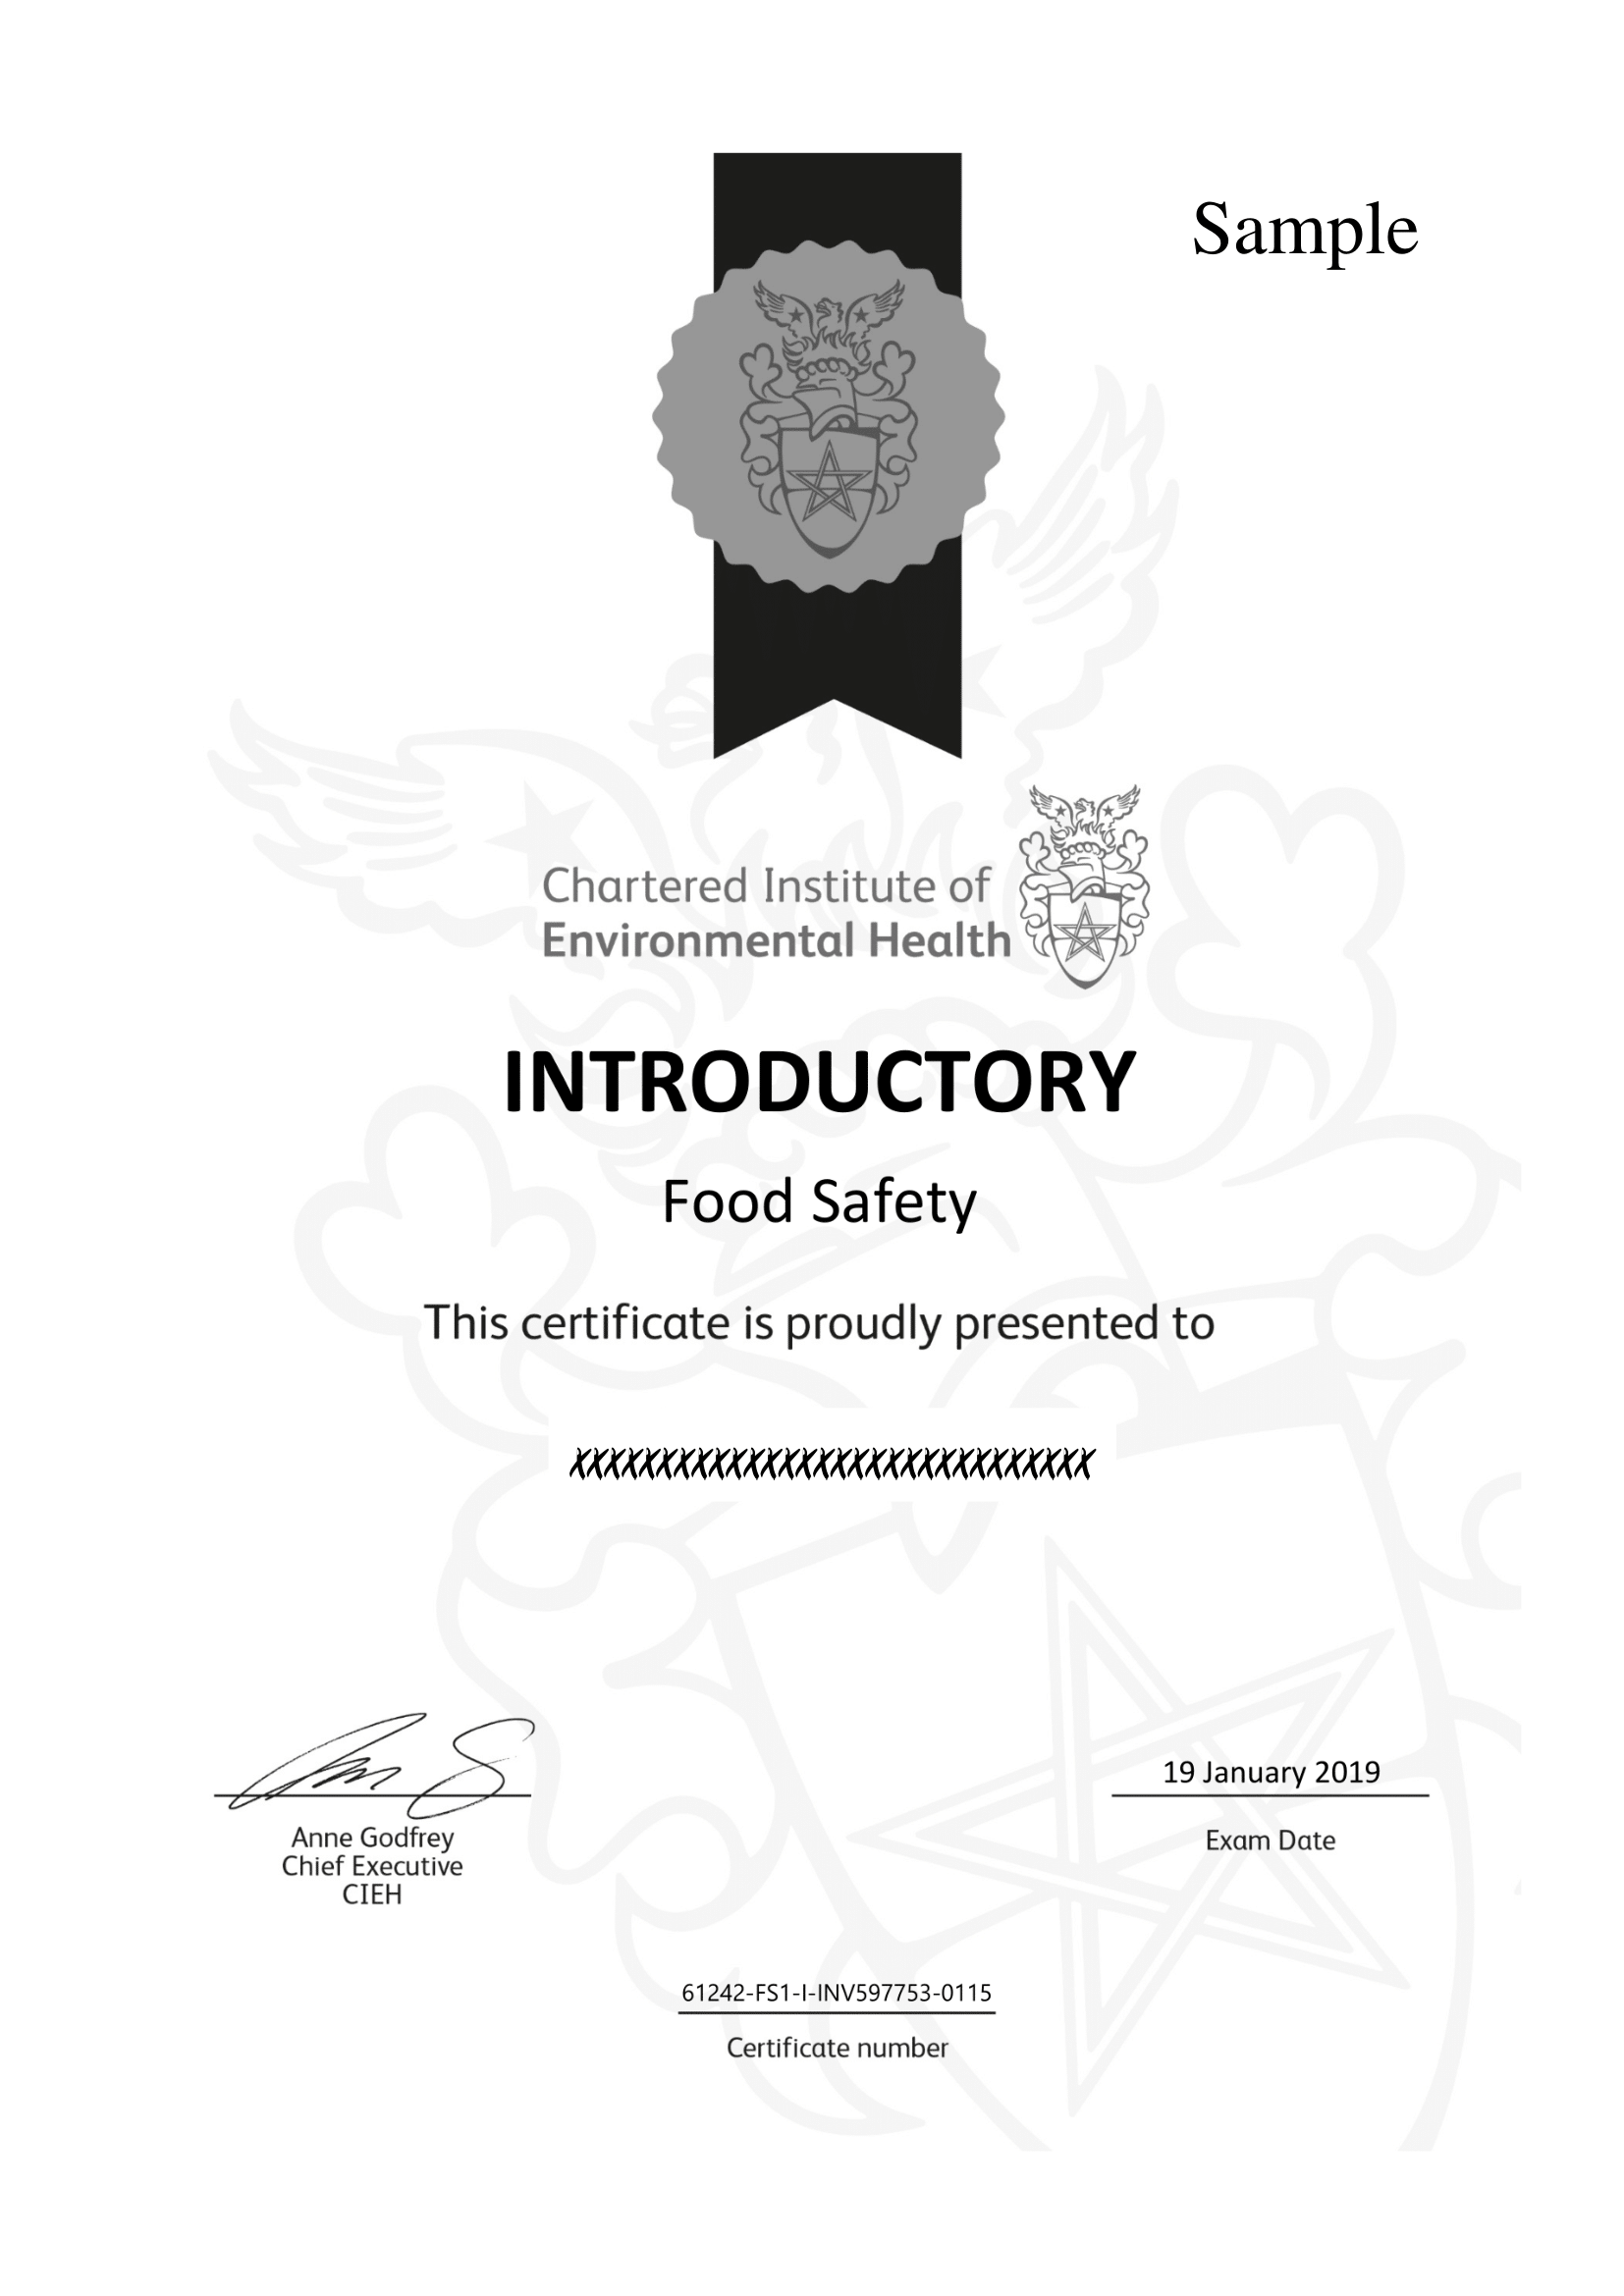 CIEH Level 1 Introductory Certificate Sample 1